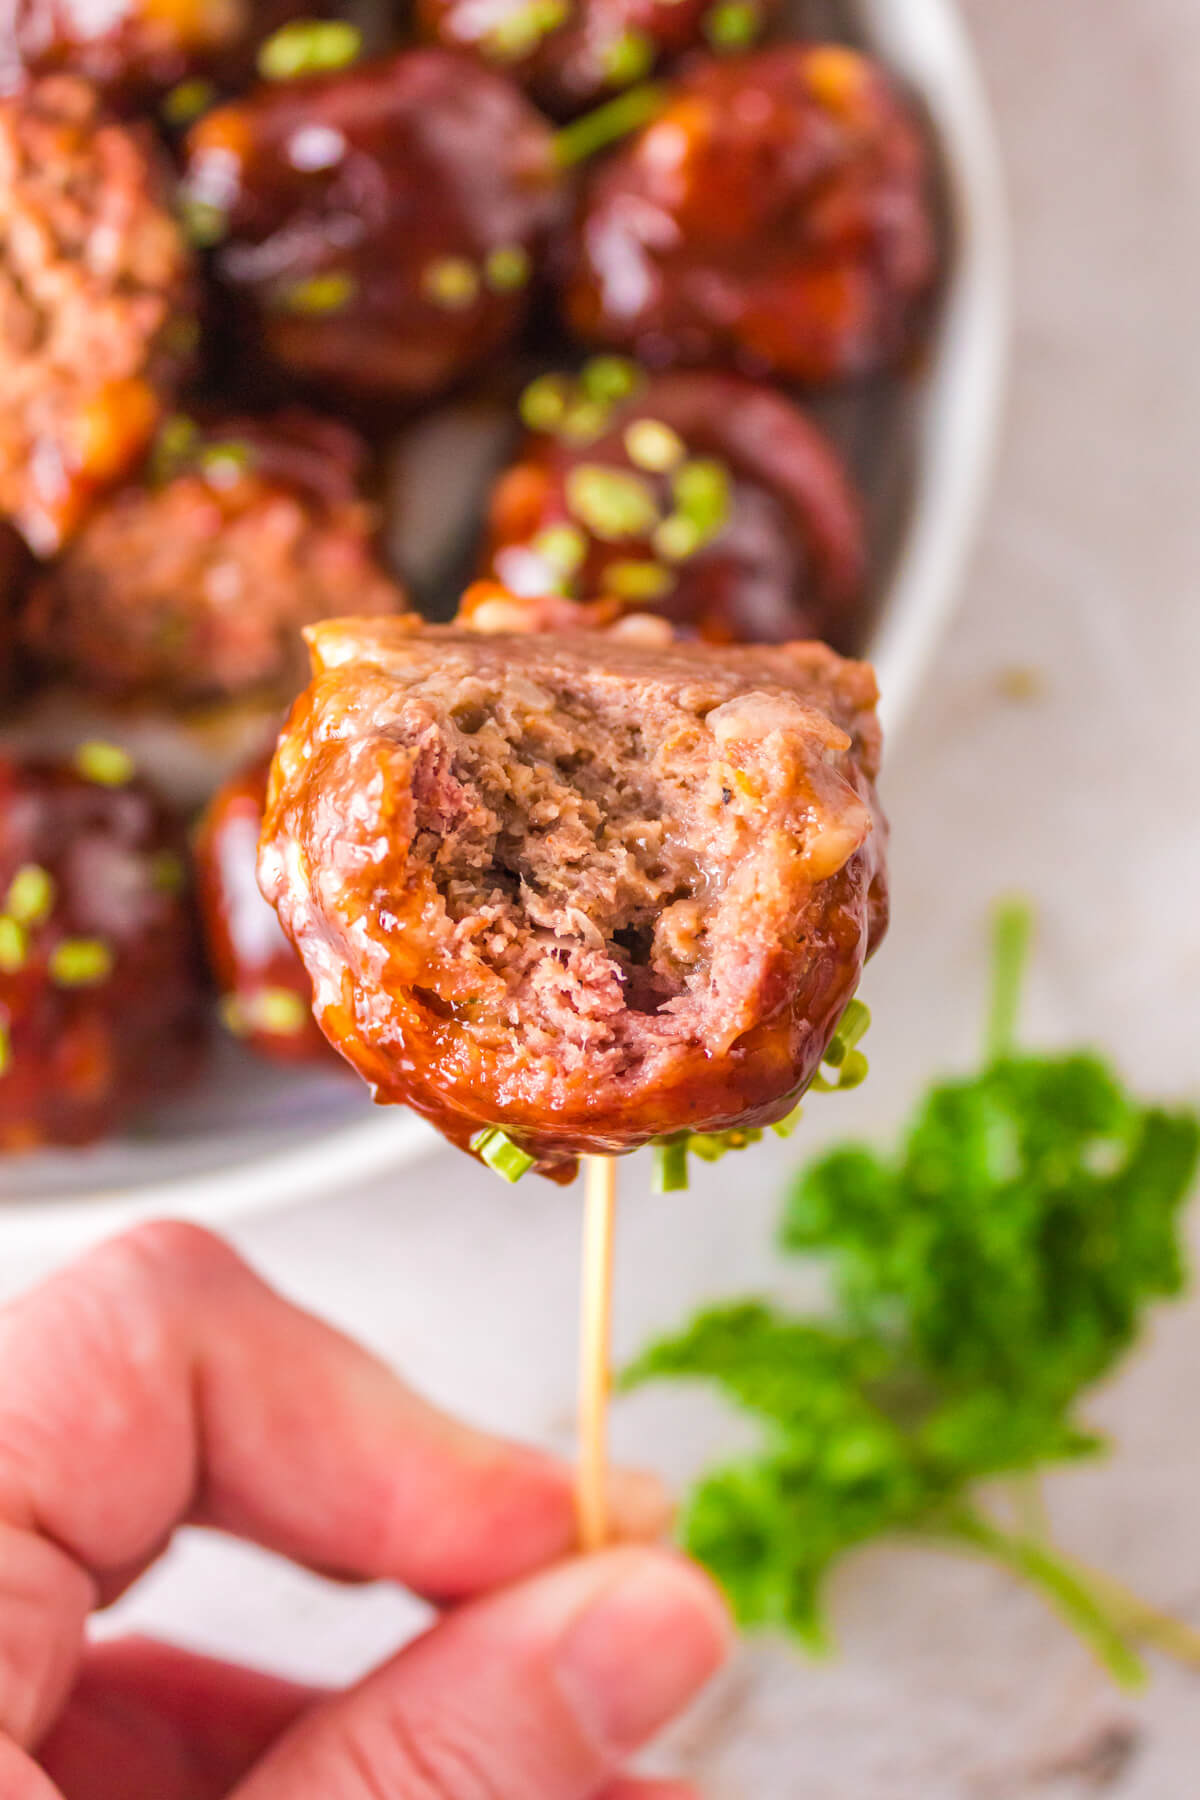 The inside of a smoked meatball garnished with chopped green chives on a toothpick.